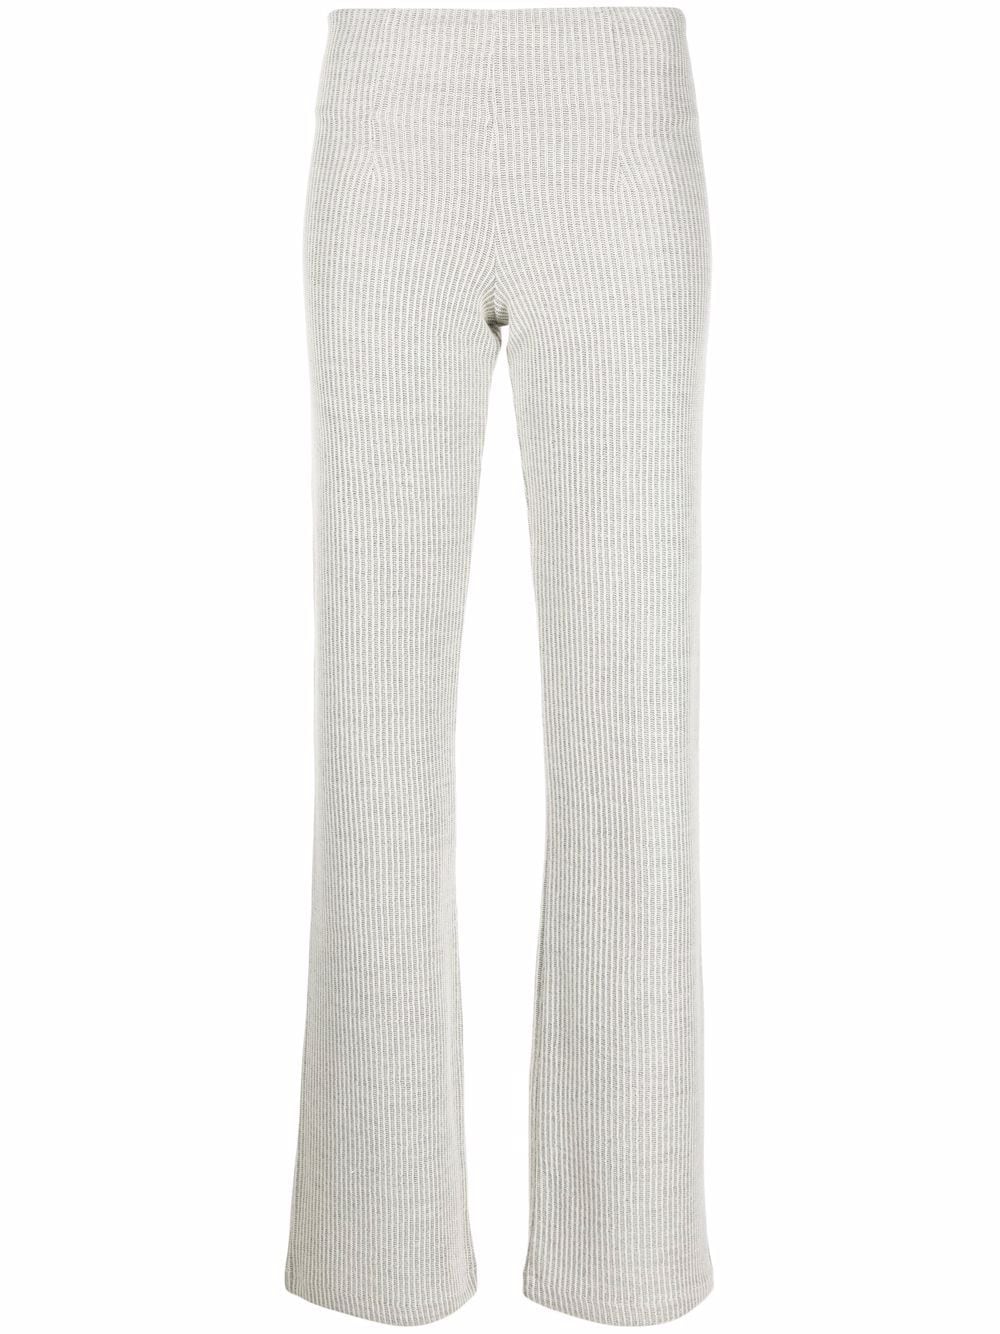 Draft ribbed flared trousers